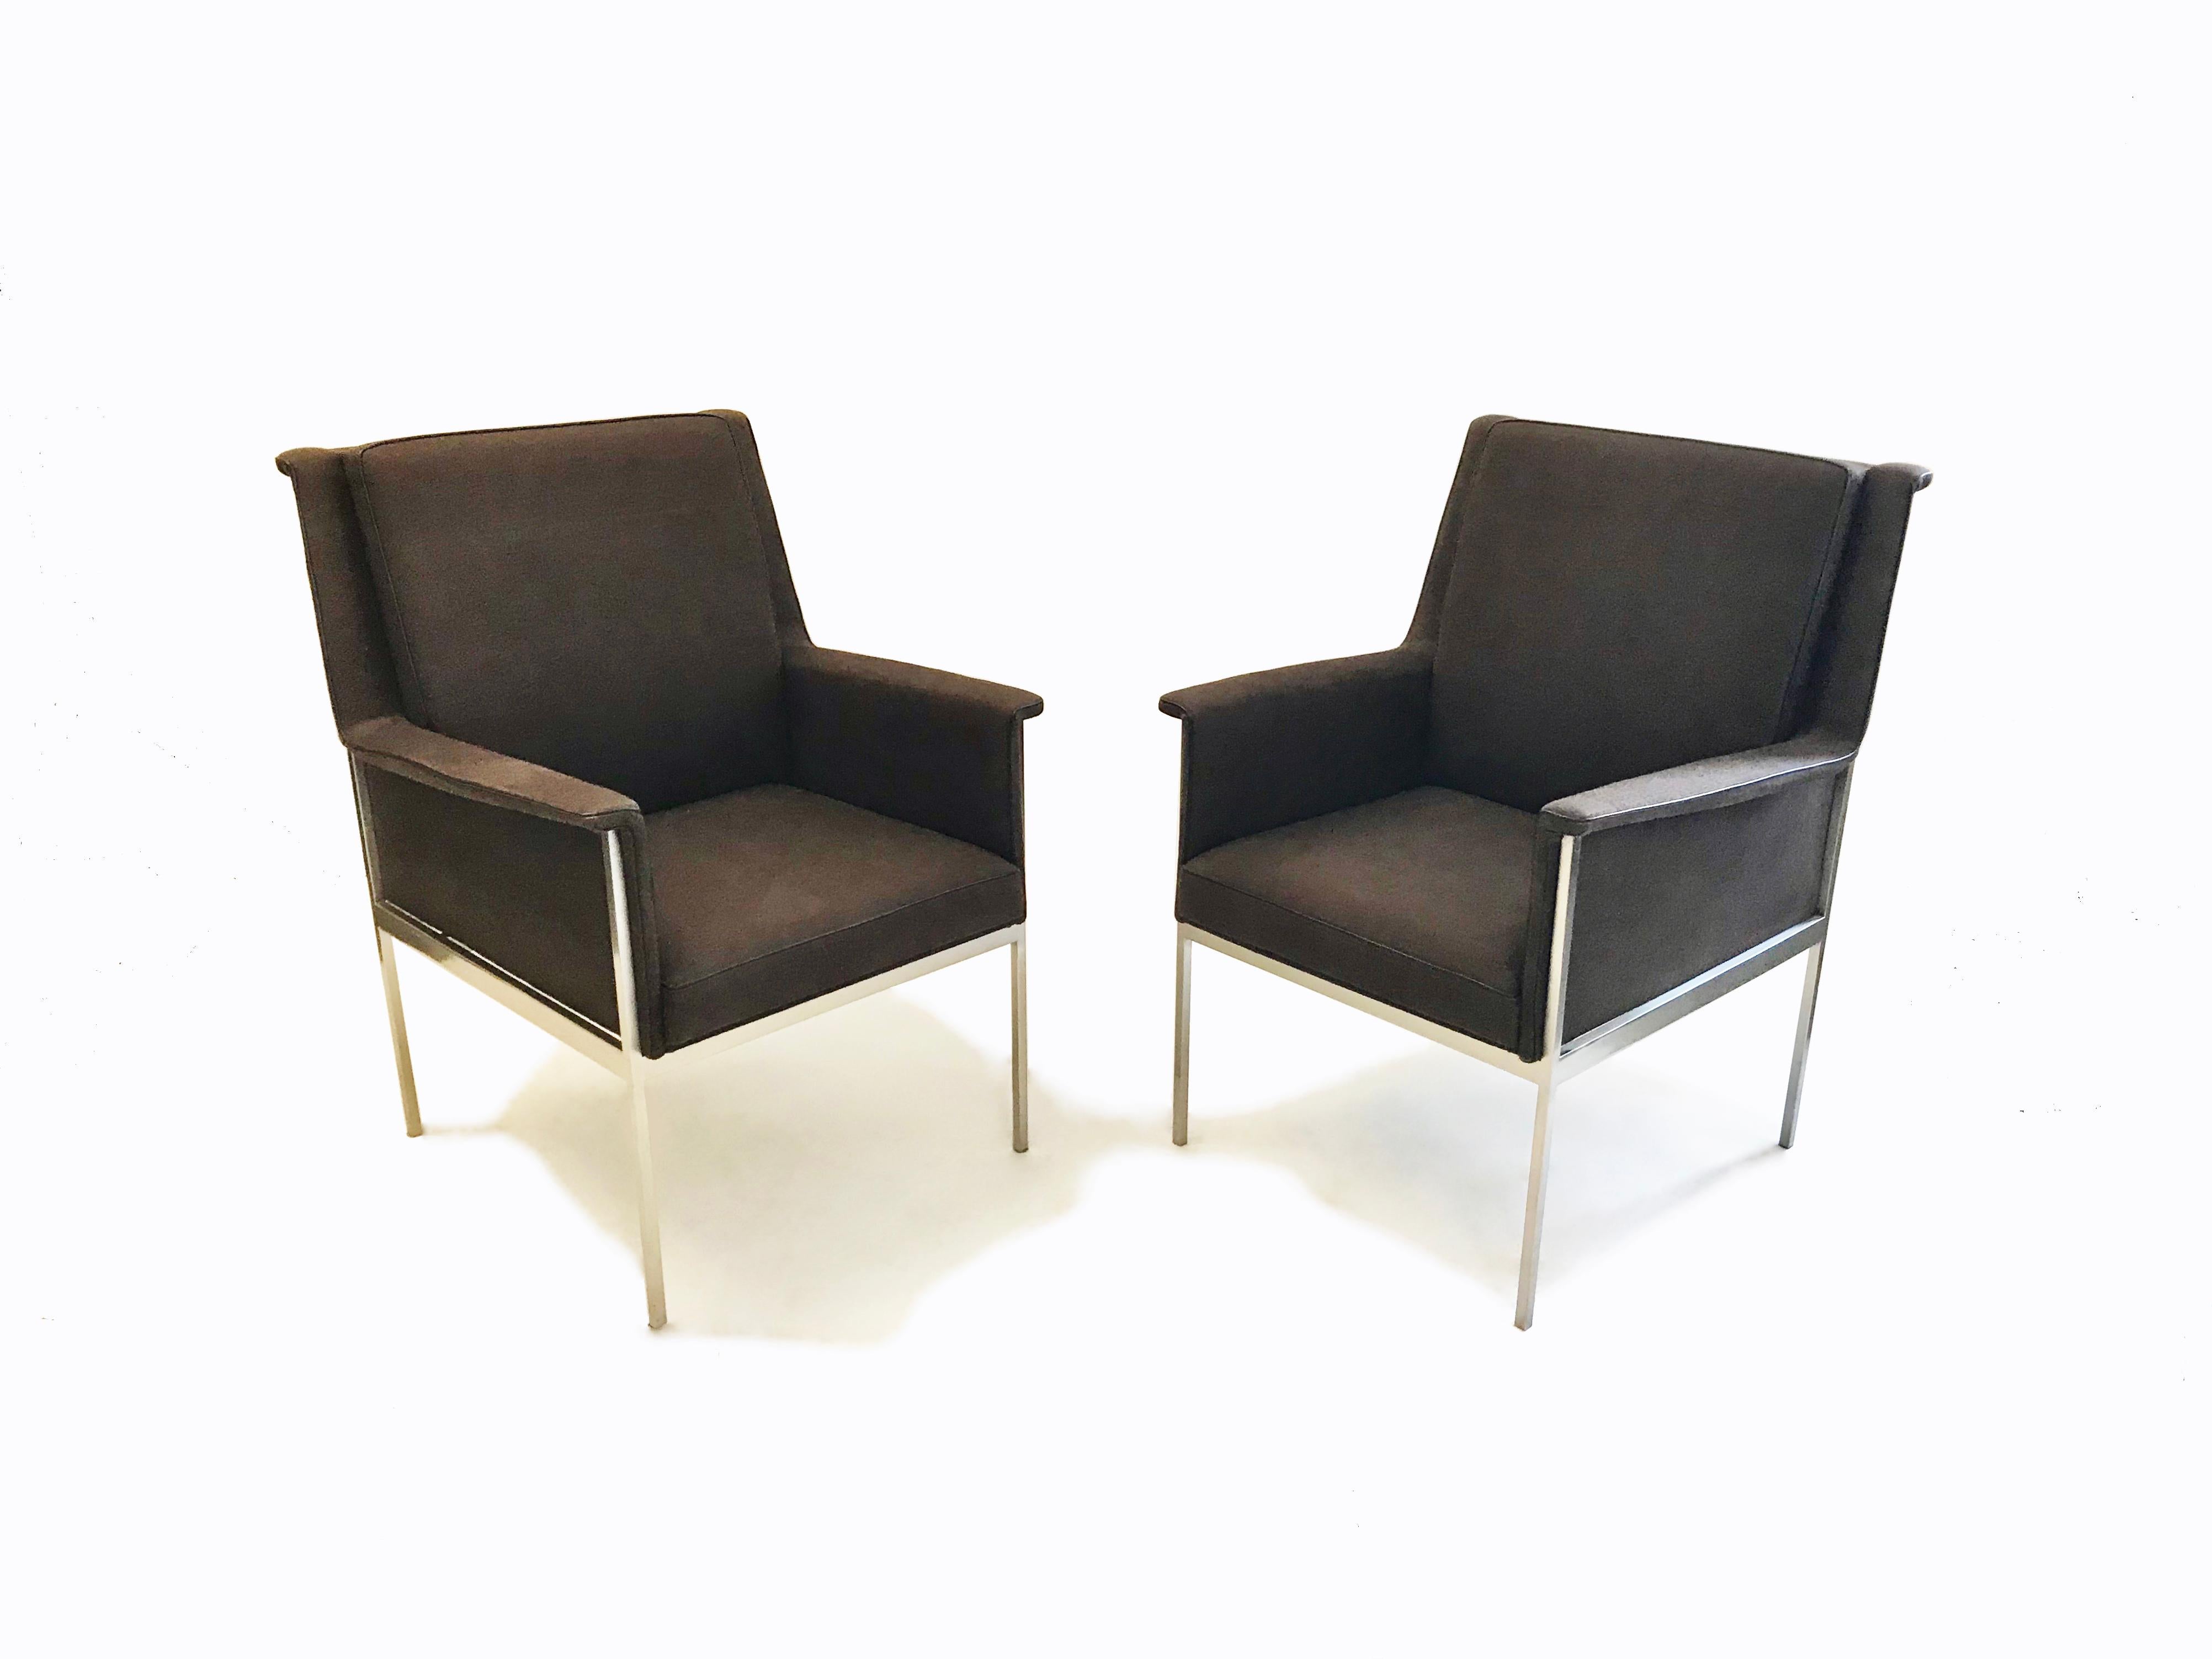 Pair of desk or side armchairs that have a a slightly fanned design at the back seat’s top edge and arms, a brushed nickel plated frame, legs that are 1.5 cm square wide, side stretchers that are 3.5 cm square wide, and seats reupholstered in thick